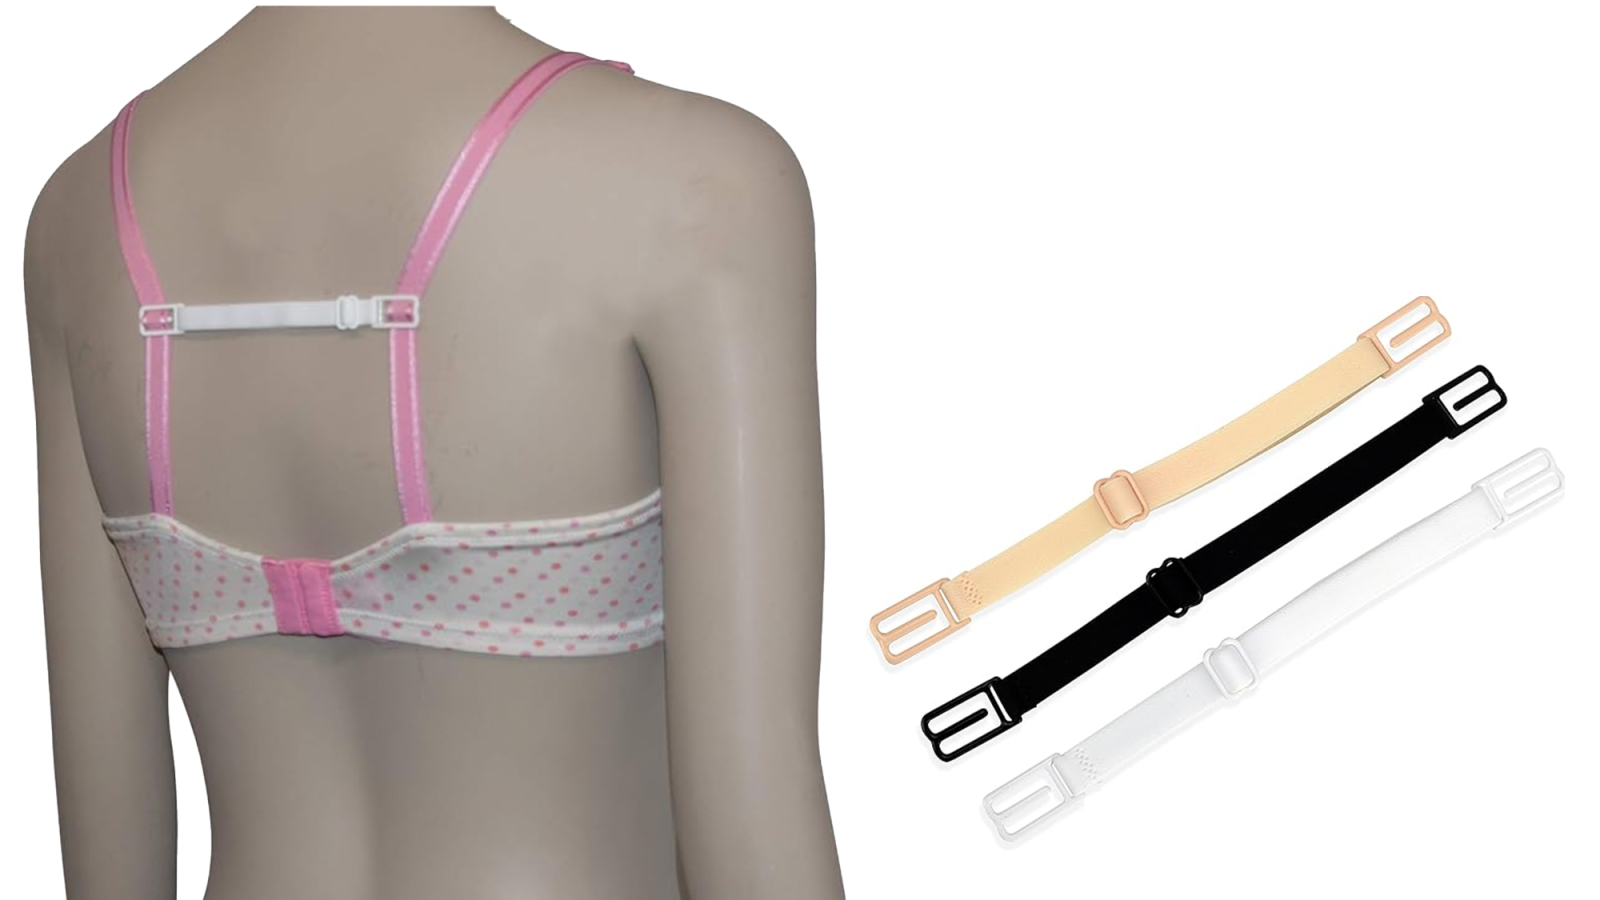 These 'Stretchy' Bra Strap Clips Have Over 3,000 5-Star Reviews